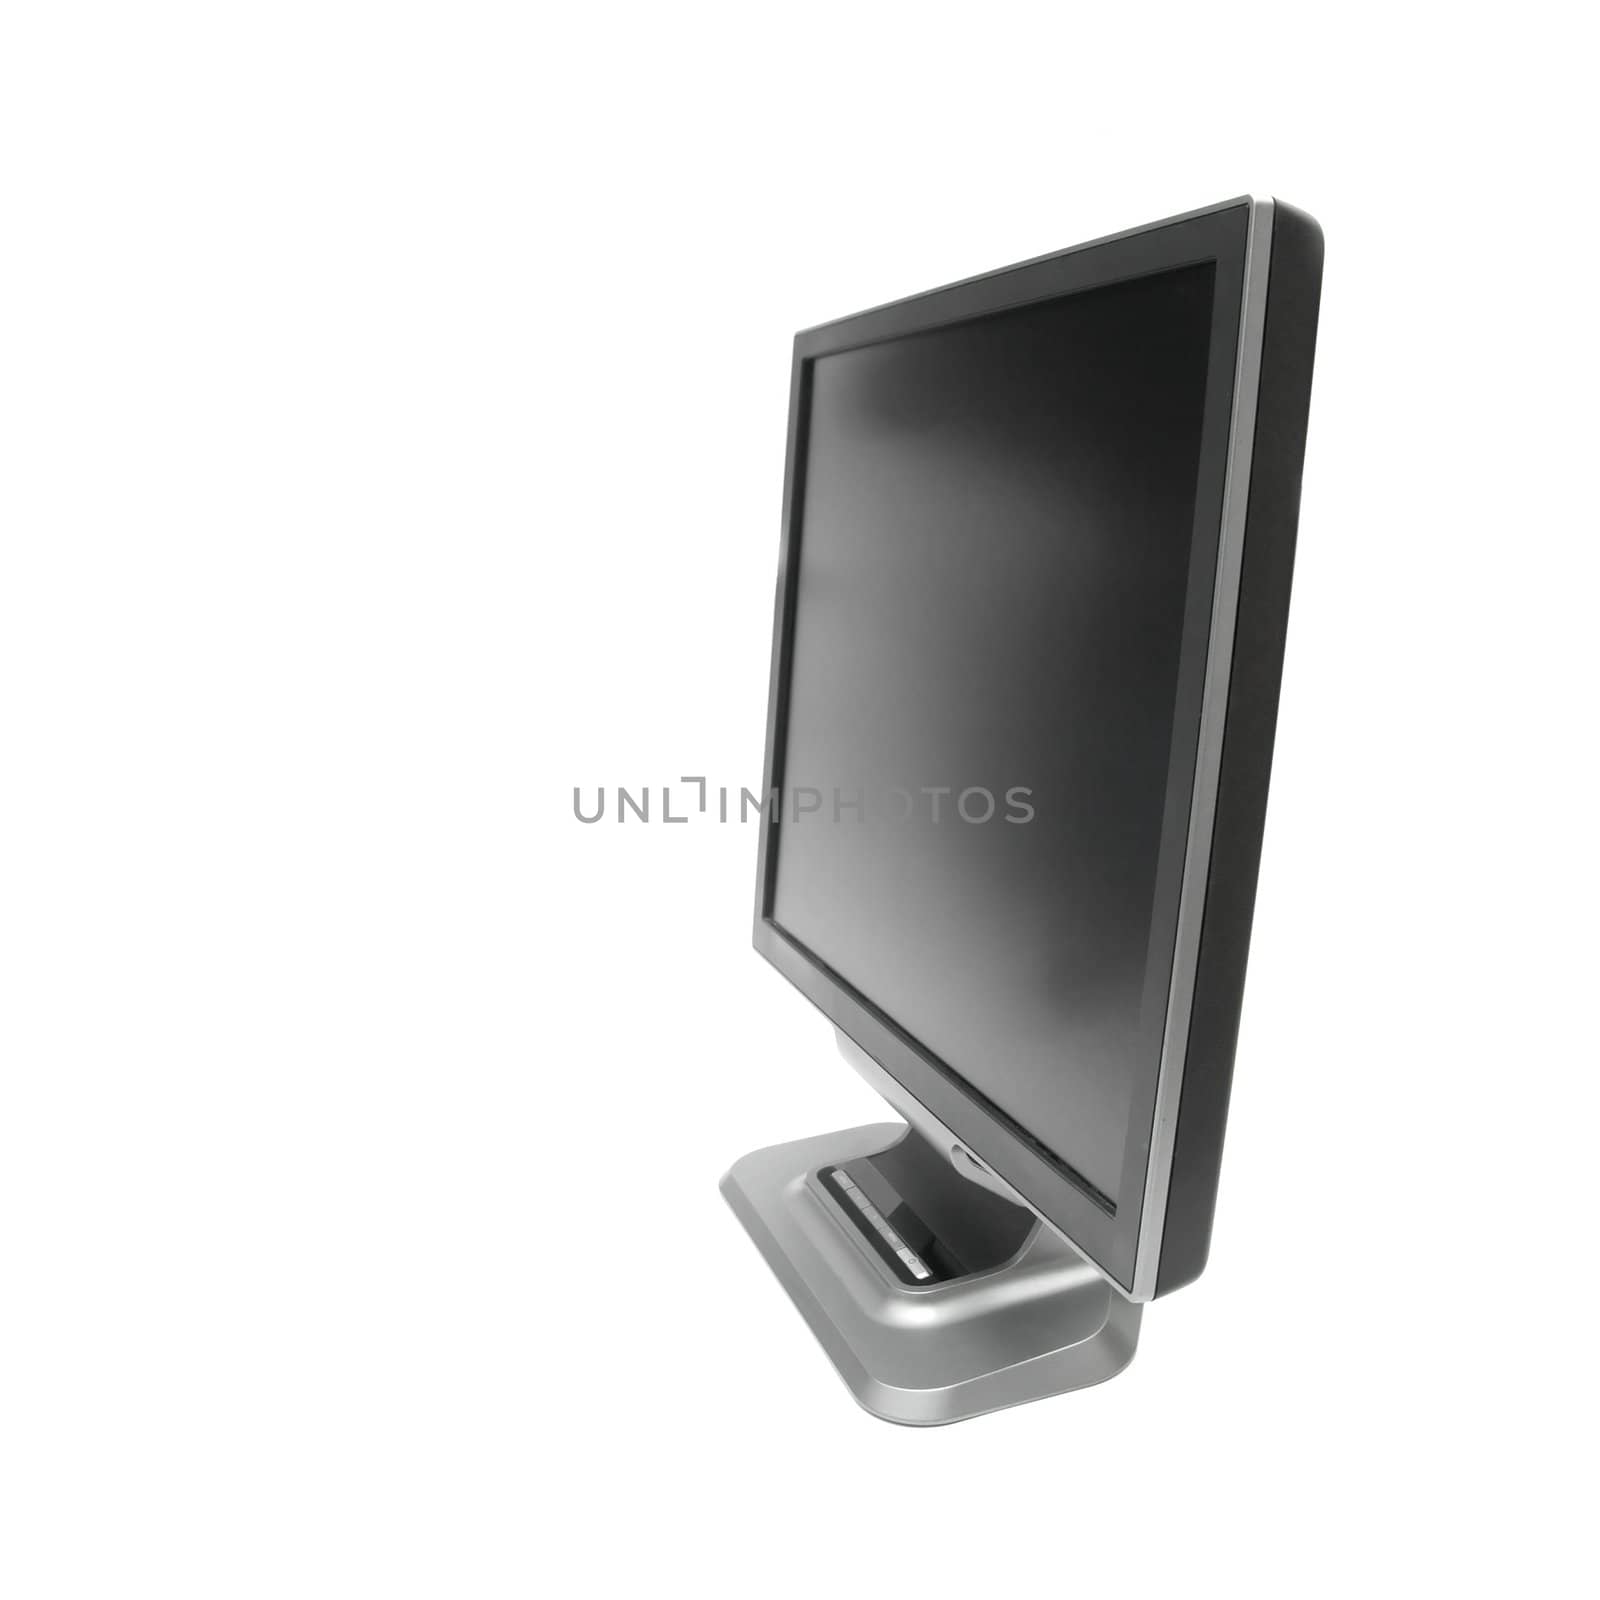 Black LCD monitor isolated on white background